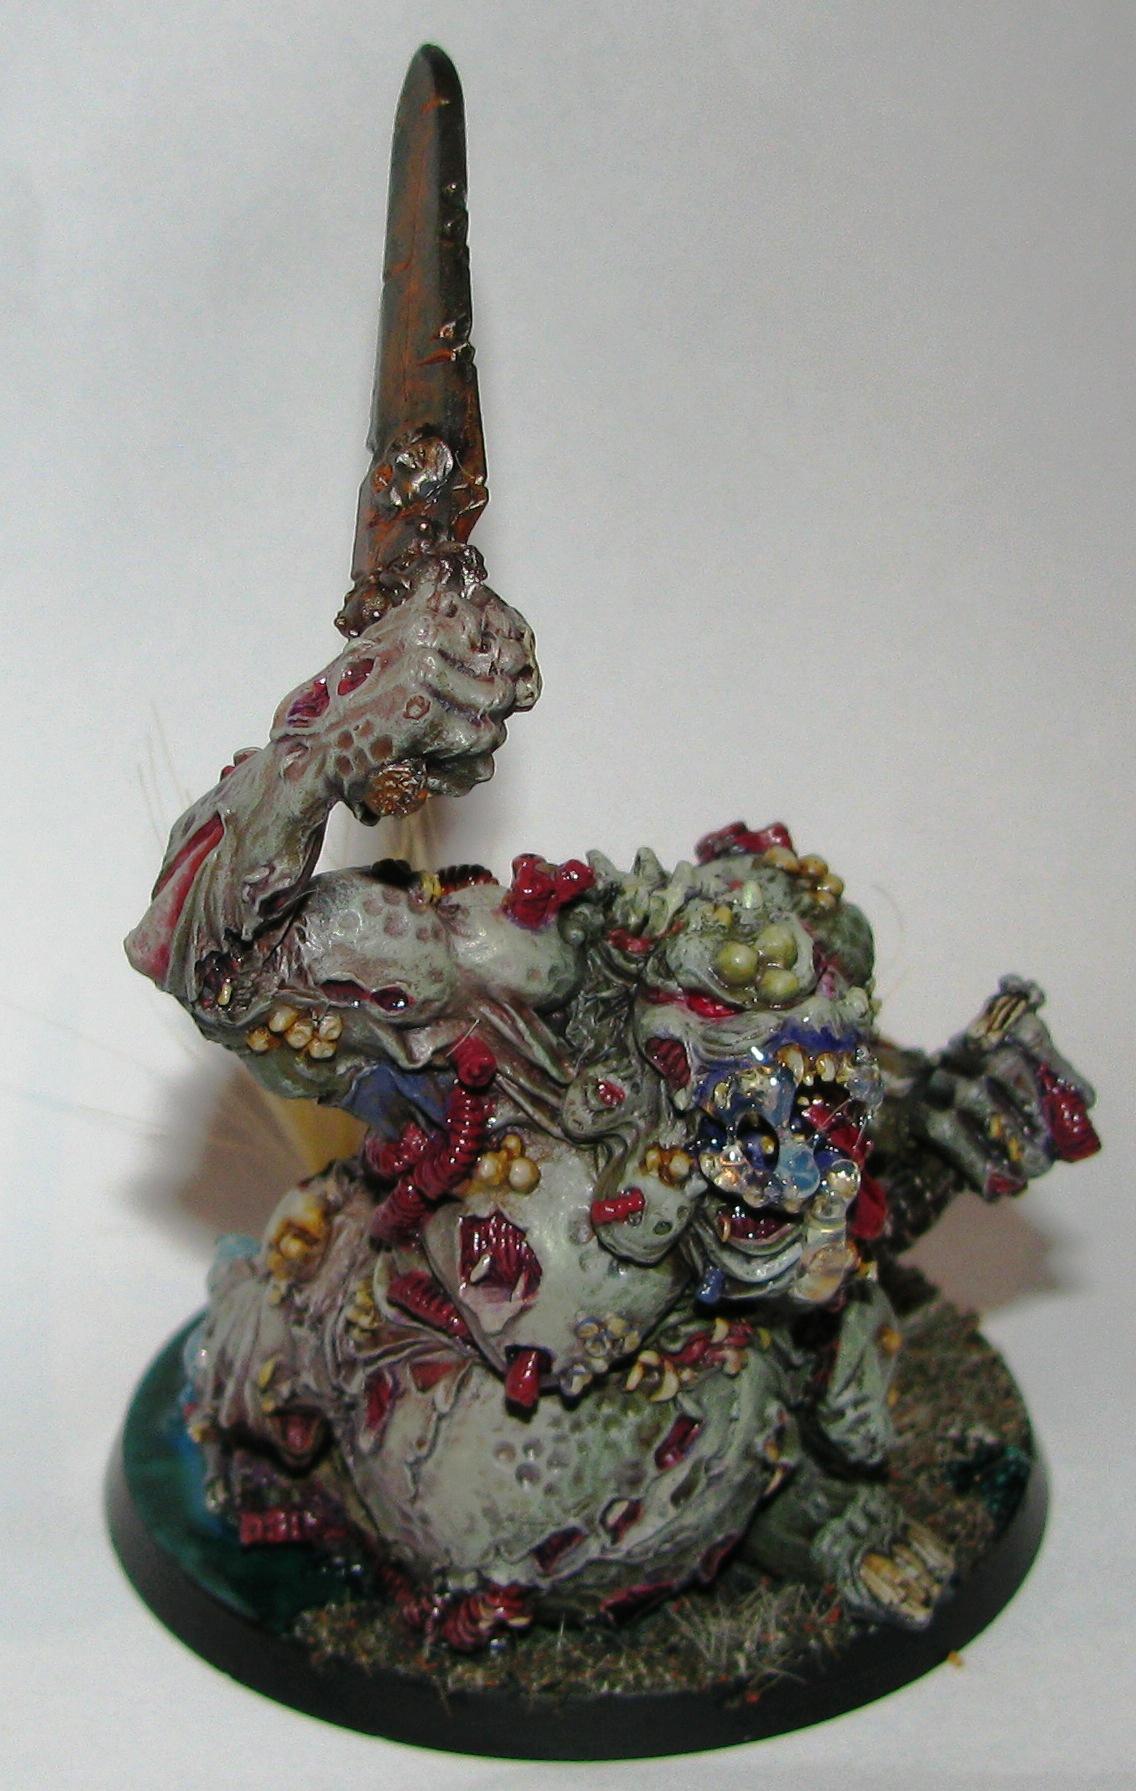 Great Unclean One complete